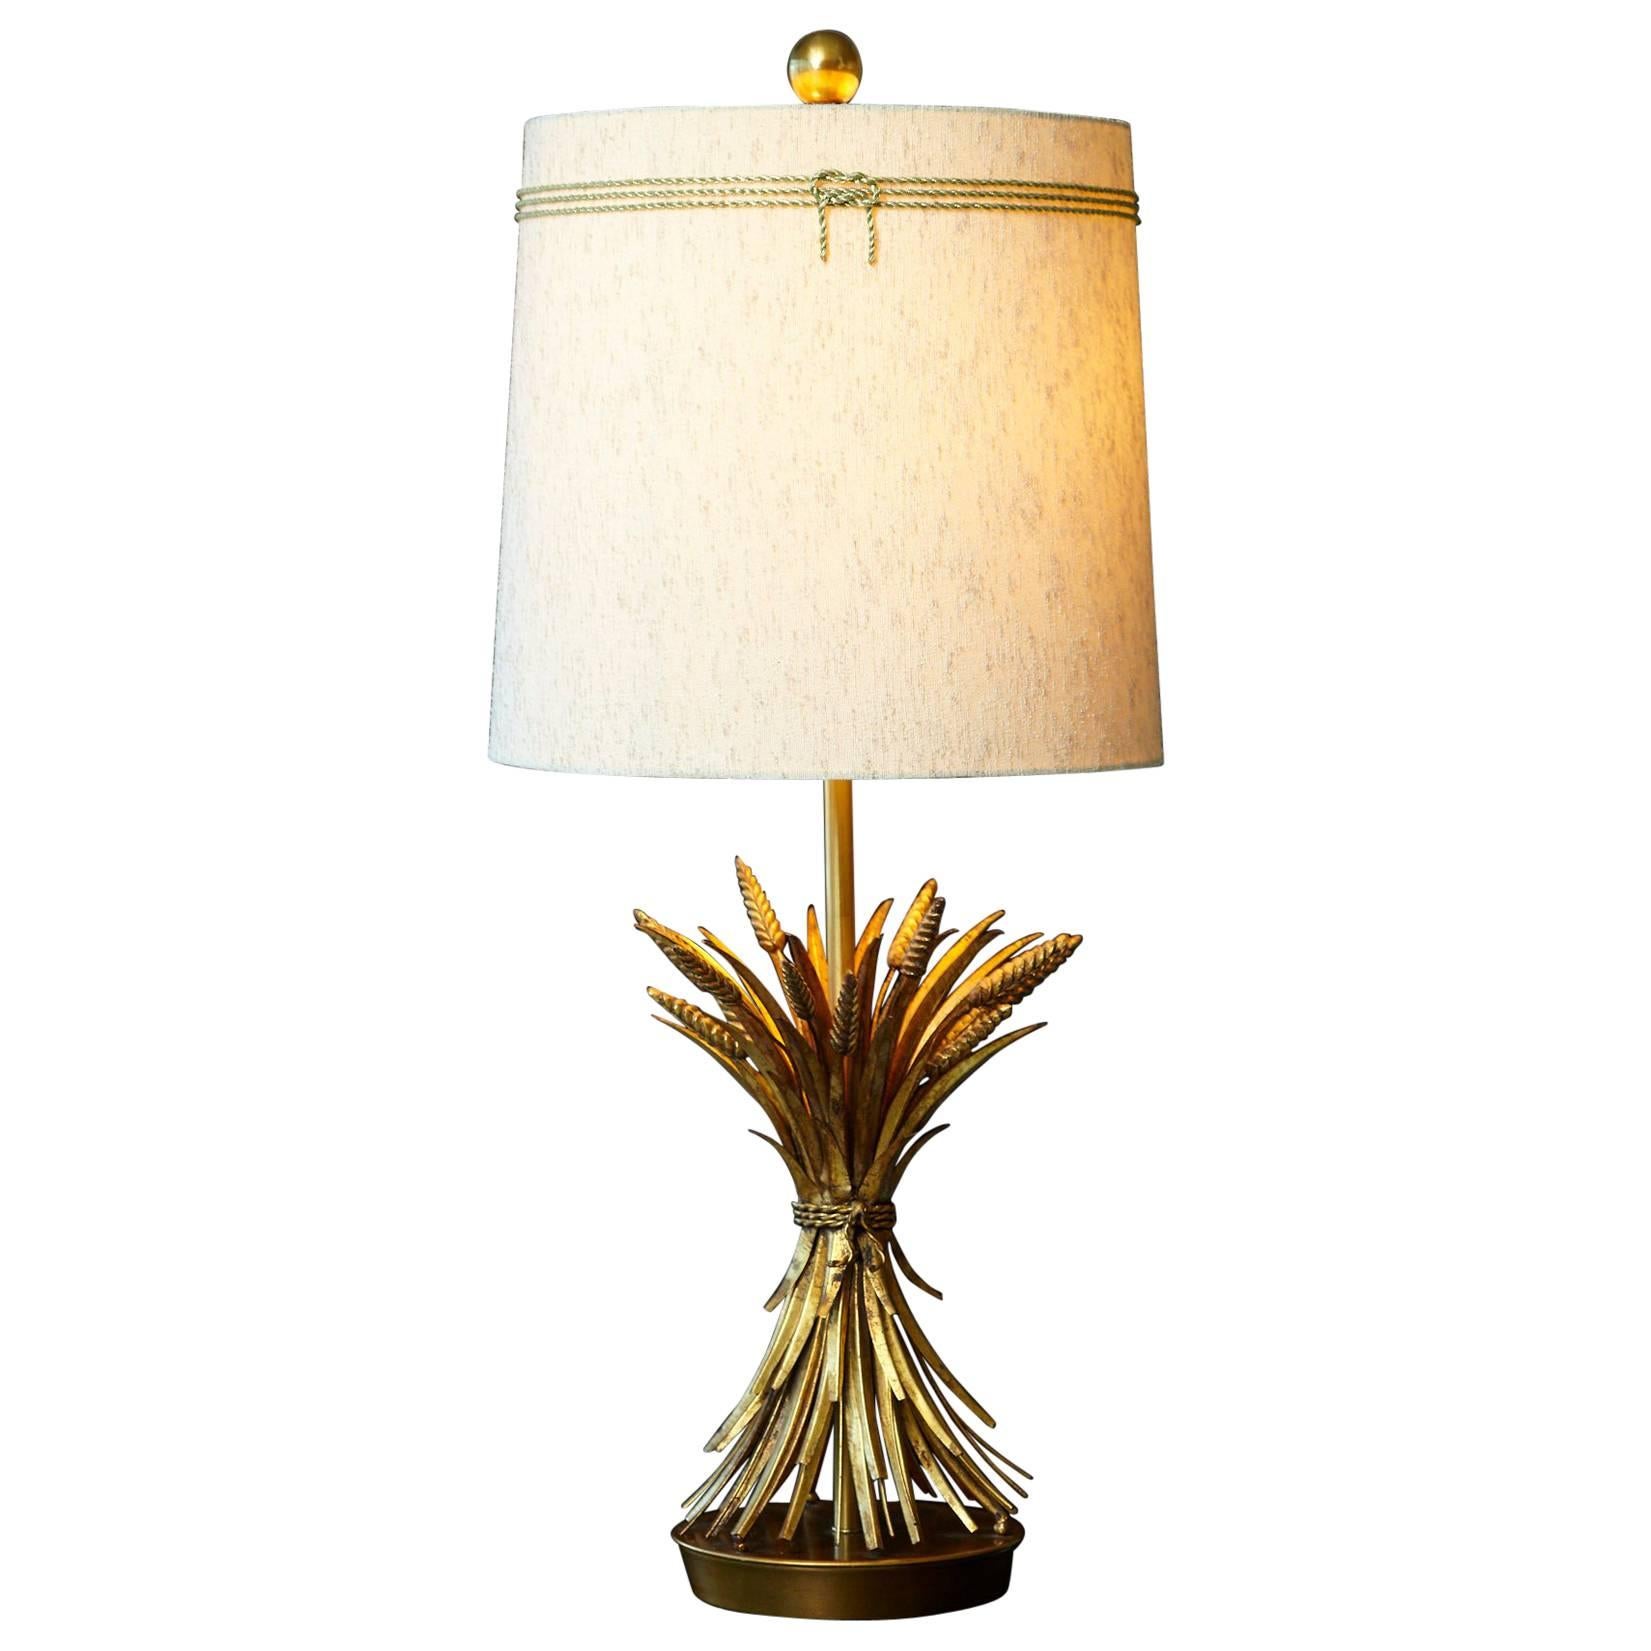 Sheaf of Wheat Gilt Metal Table Lamp by Mabro, Lamp 2